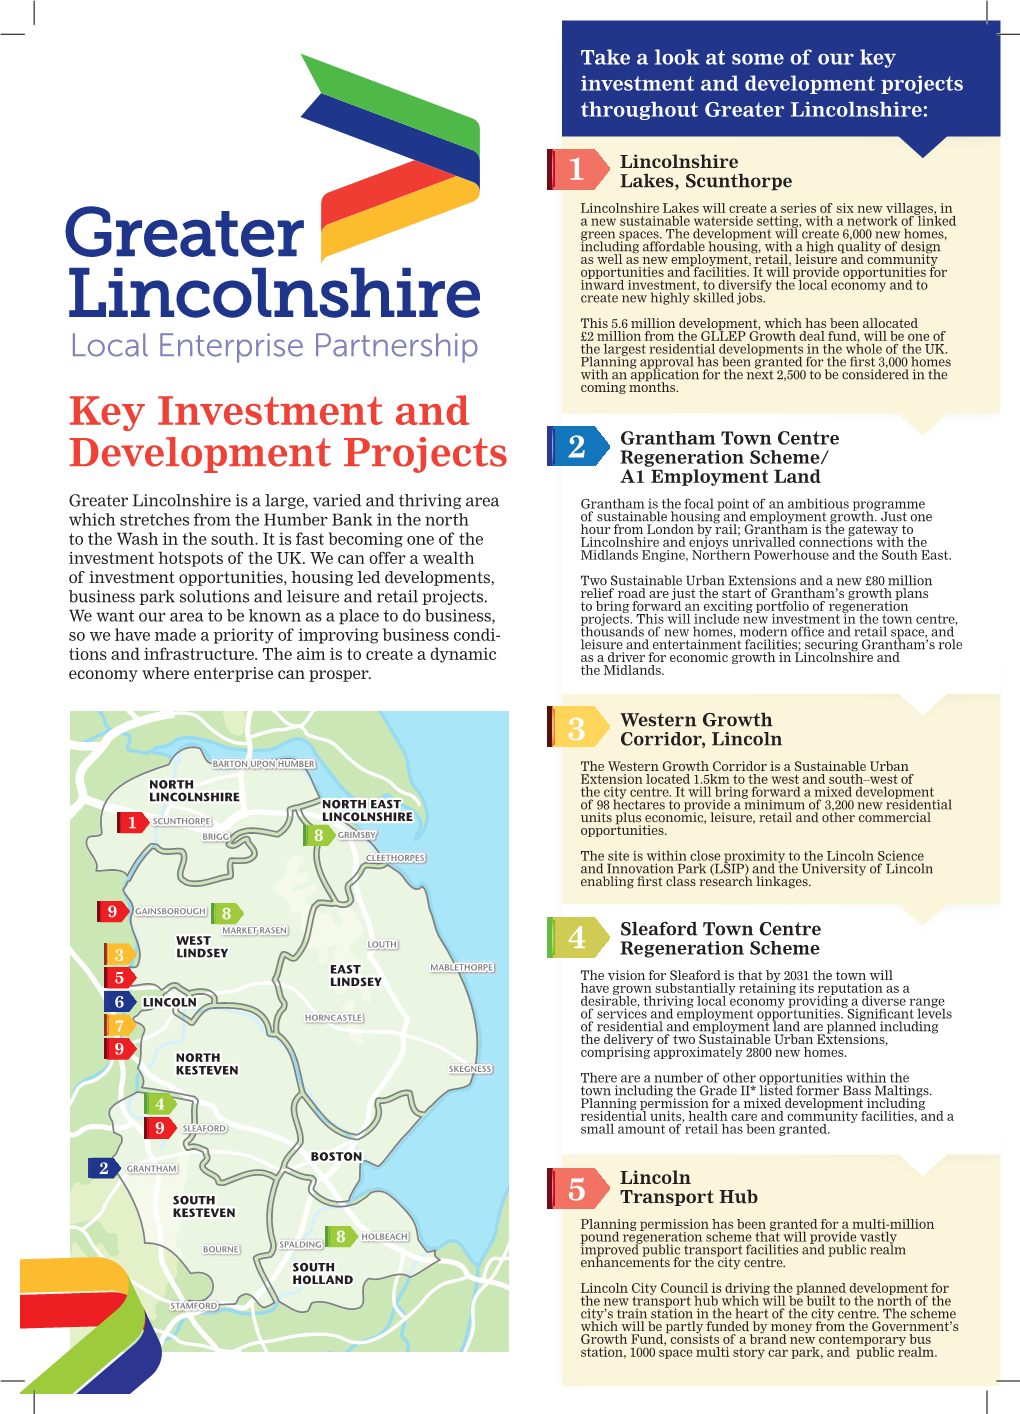 Key Investment and Development Projects Throughout Greater Lincolnshire